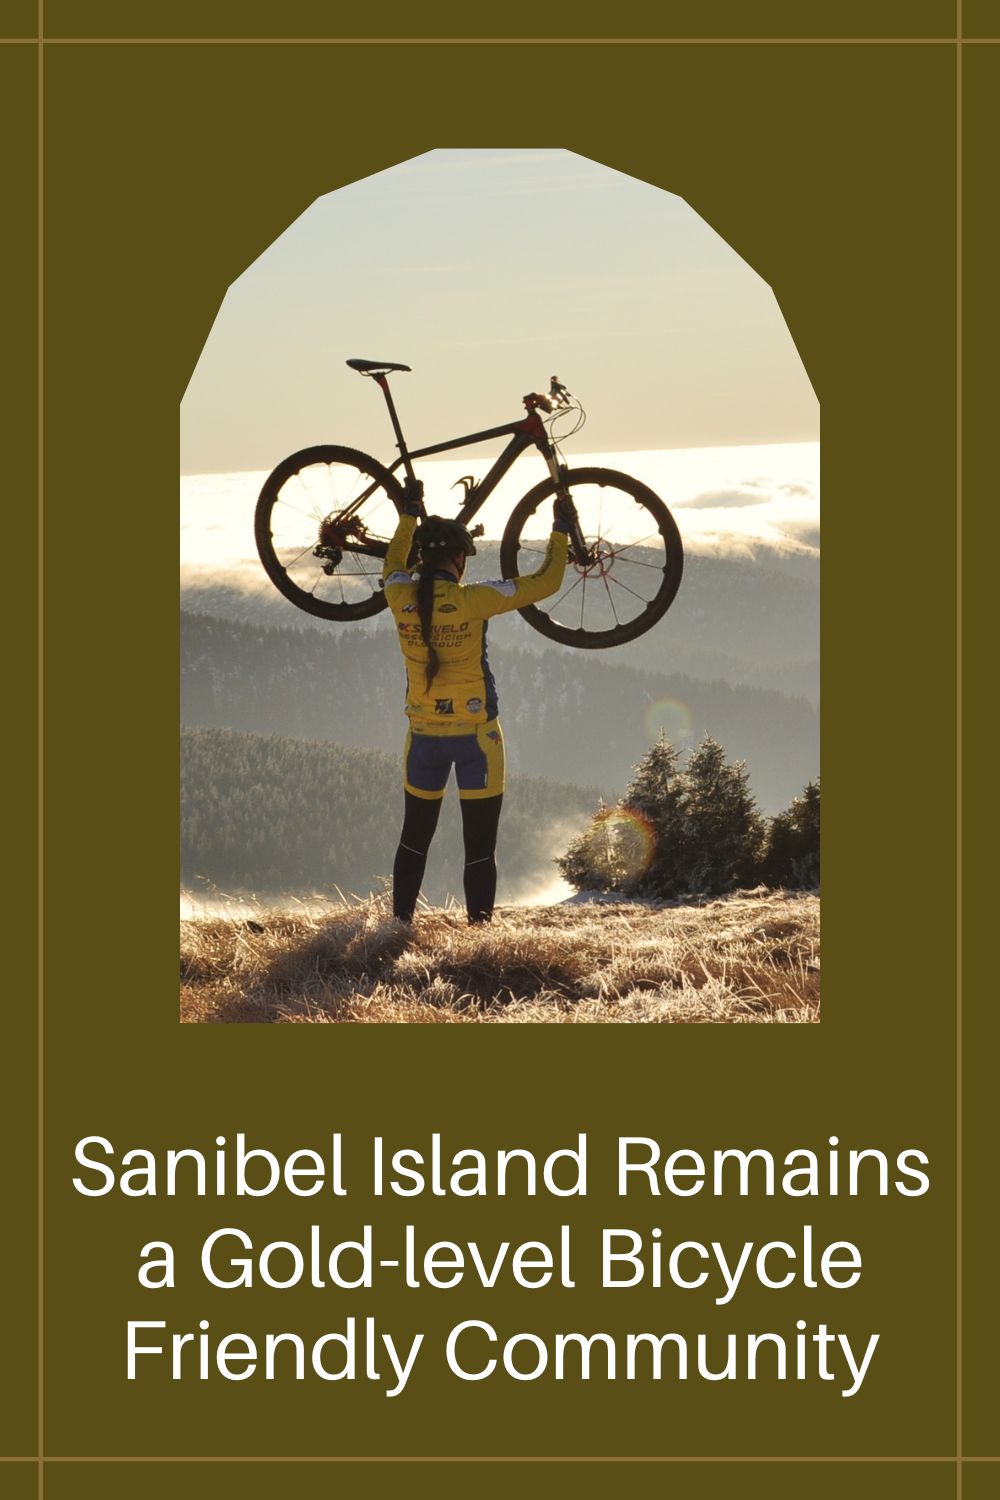 Sanibel Island Remains a Gold-level Bicycle Friendly Community